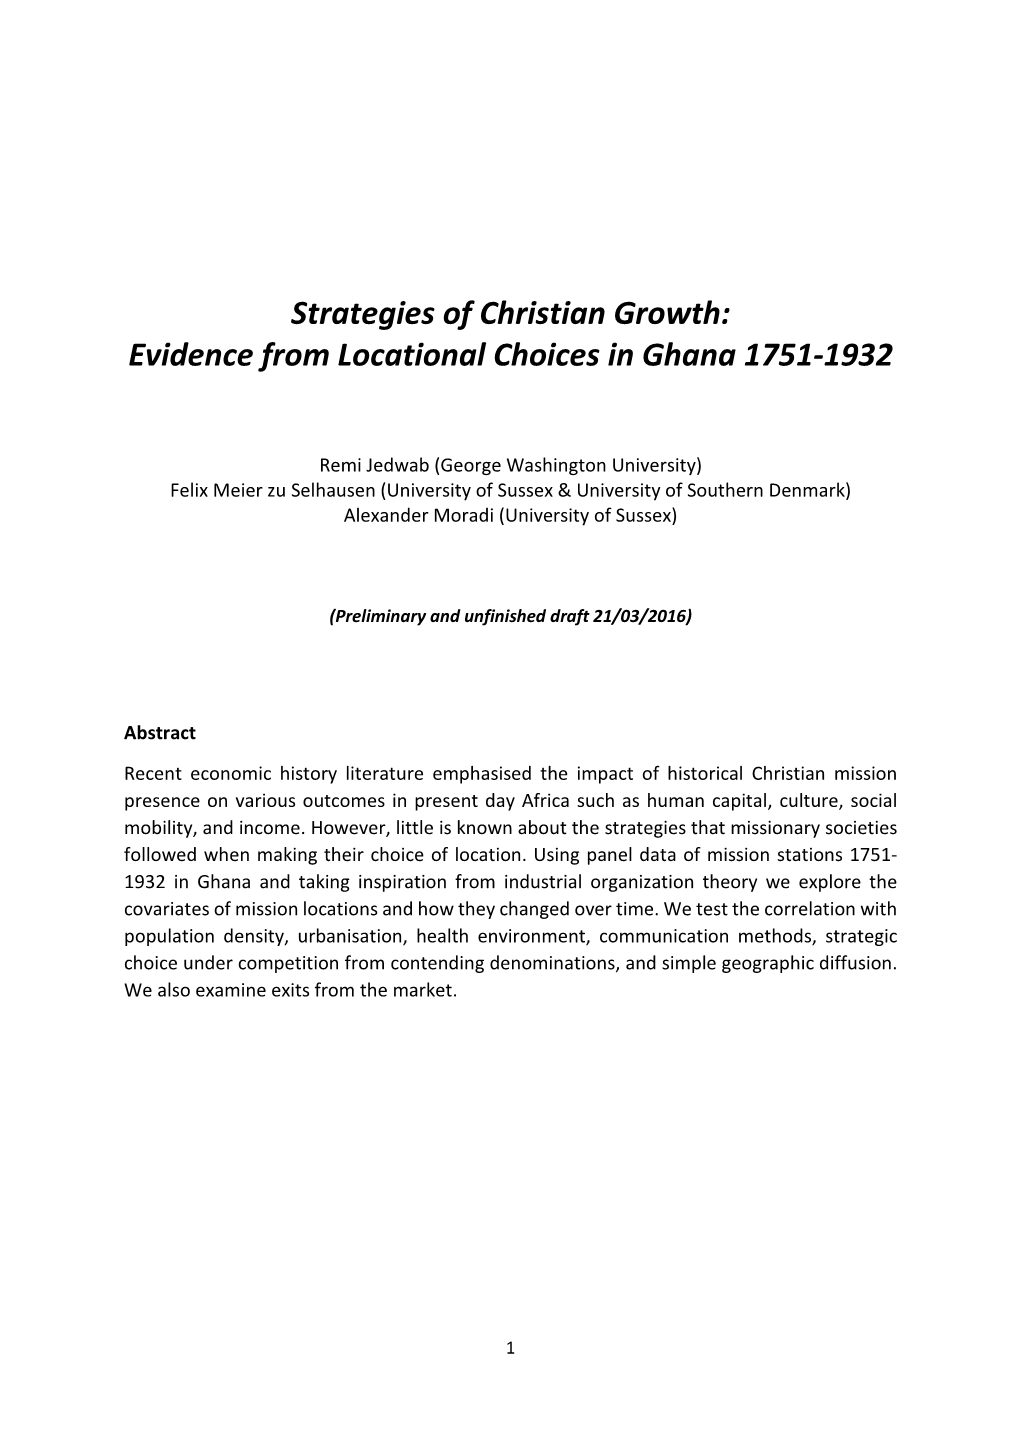 Strategies of Christian Growth: Evidence from Locational Choices in Ghana 1751-1932